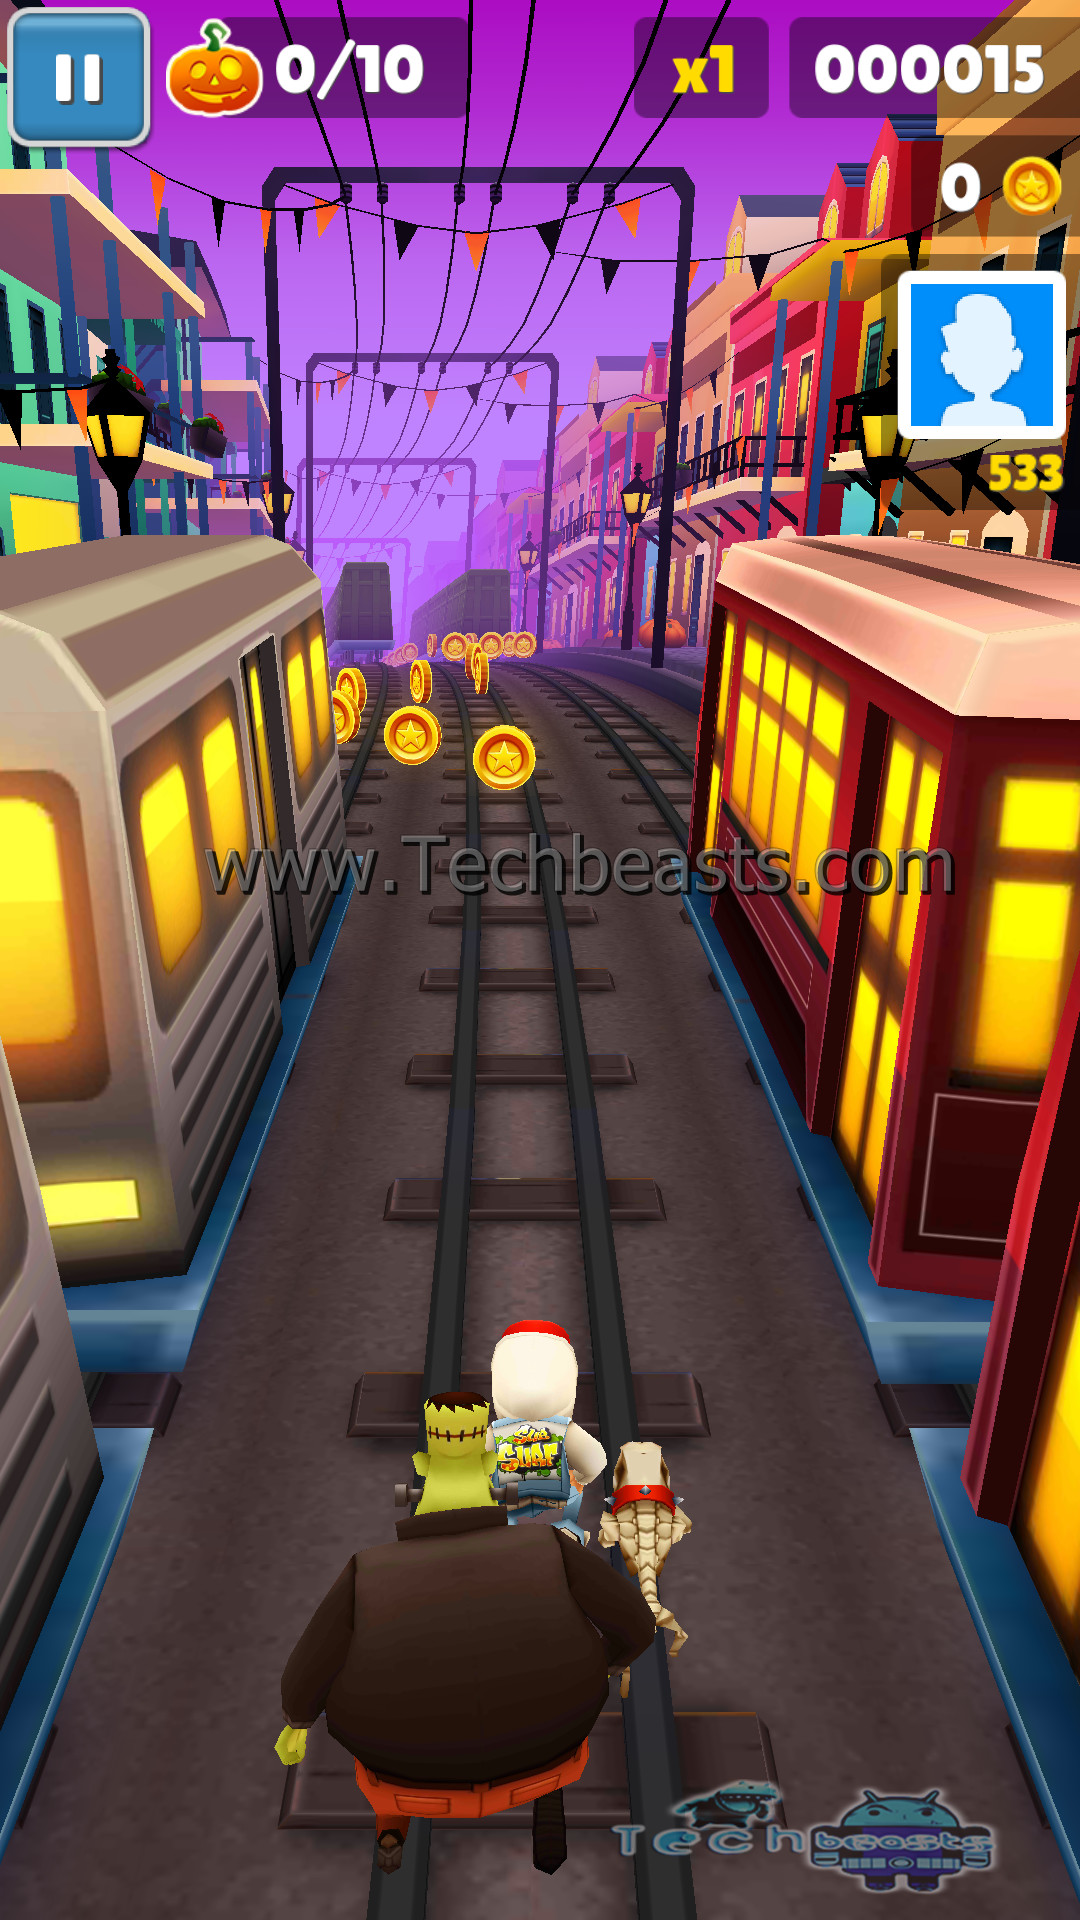 1080x1920 Subway Surfers New Orleans Hack, Unlimited Keys & Coins – Download Here